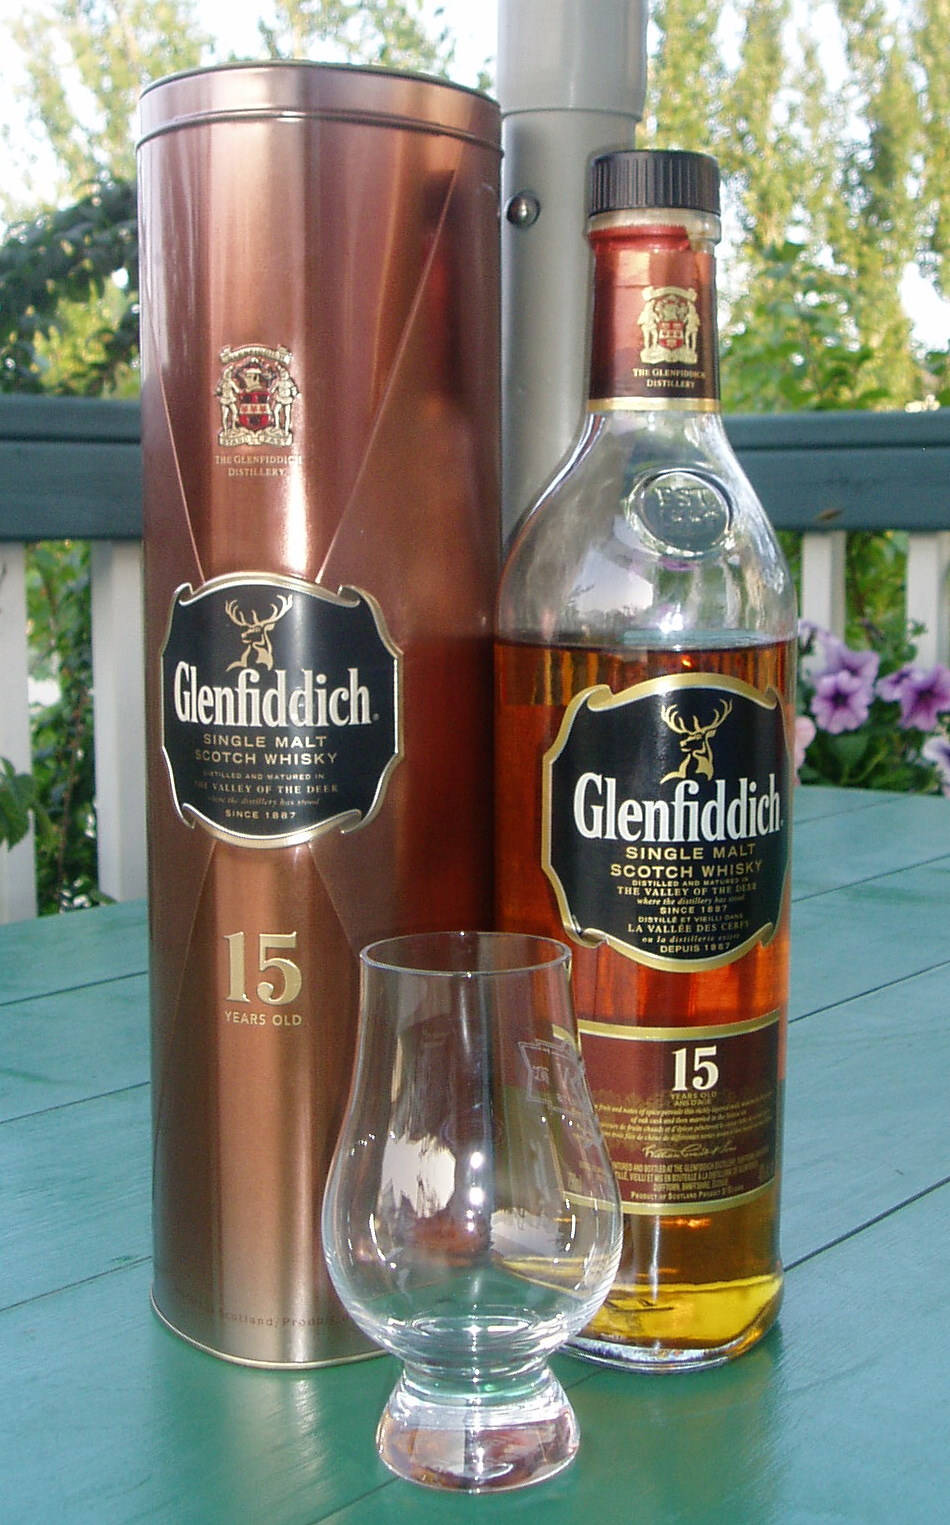 Glenfiddich 15 Year Old With Wee Glencairn Glass Wallpaper